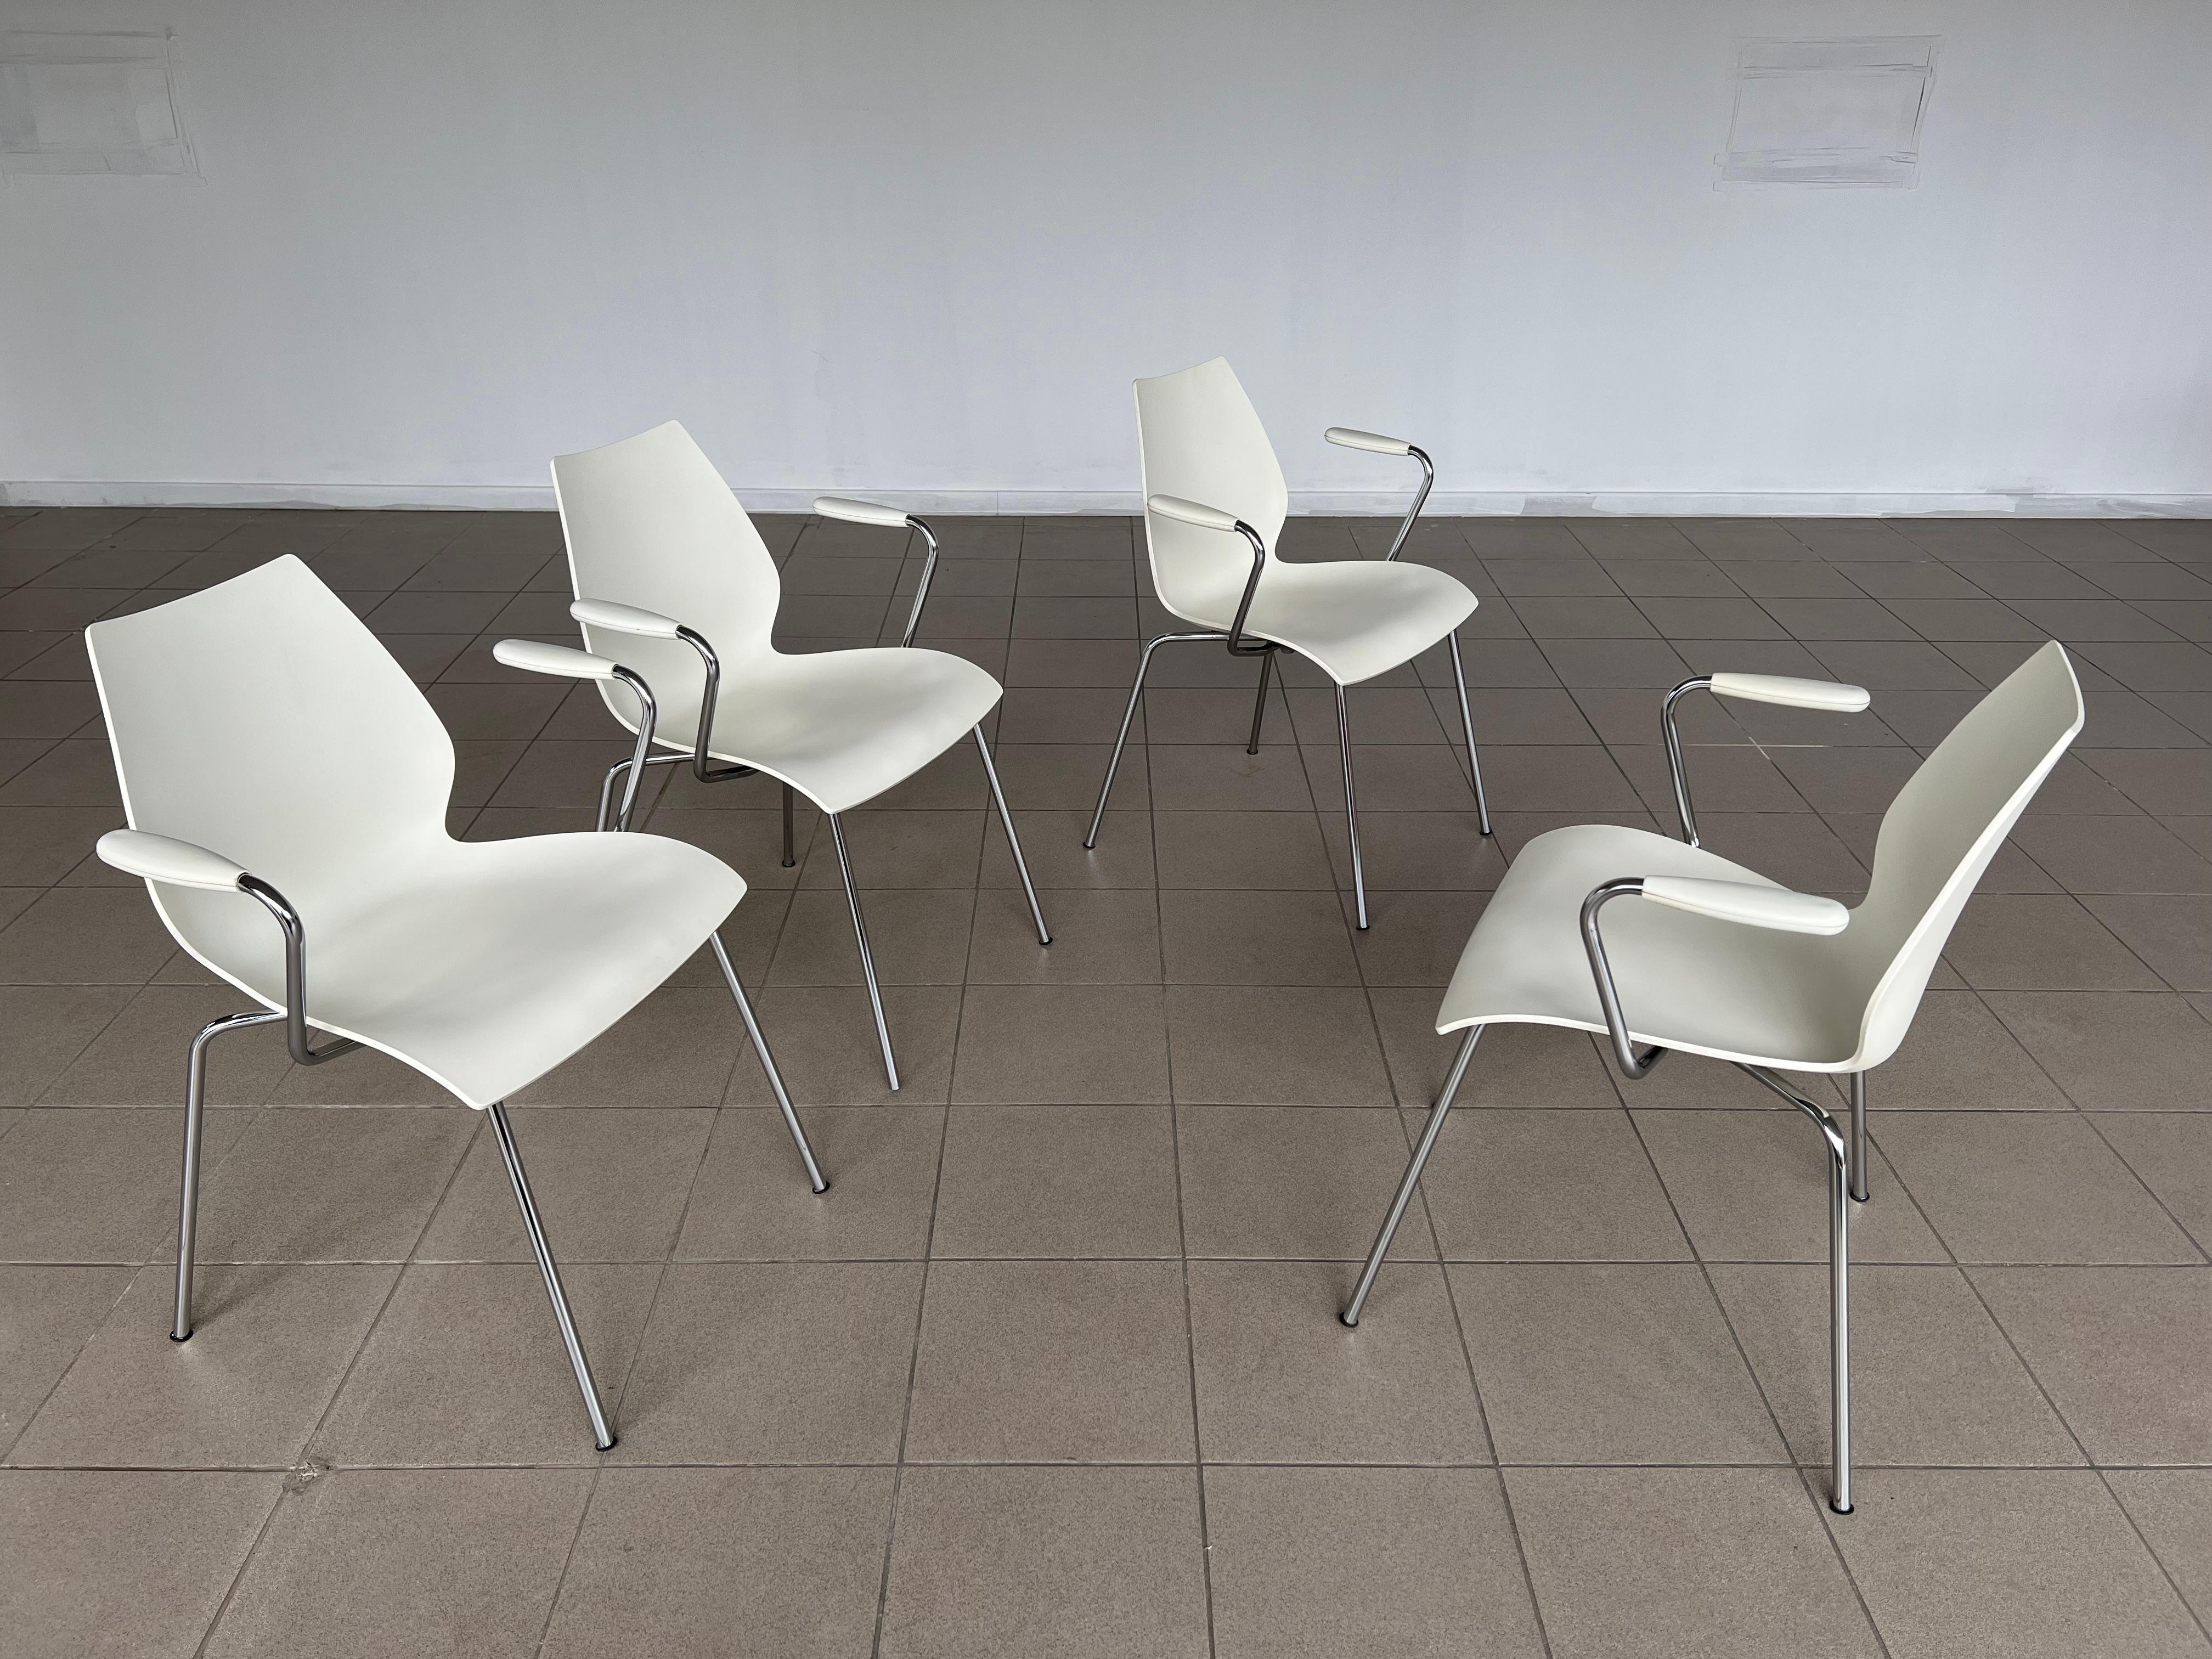 Late 20th Century Maui Dining or Office Chairs by Vico Magistretti for Kartell - Set of 4